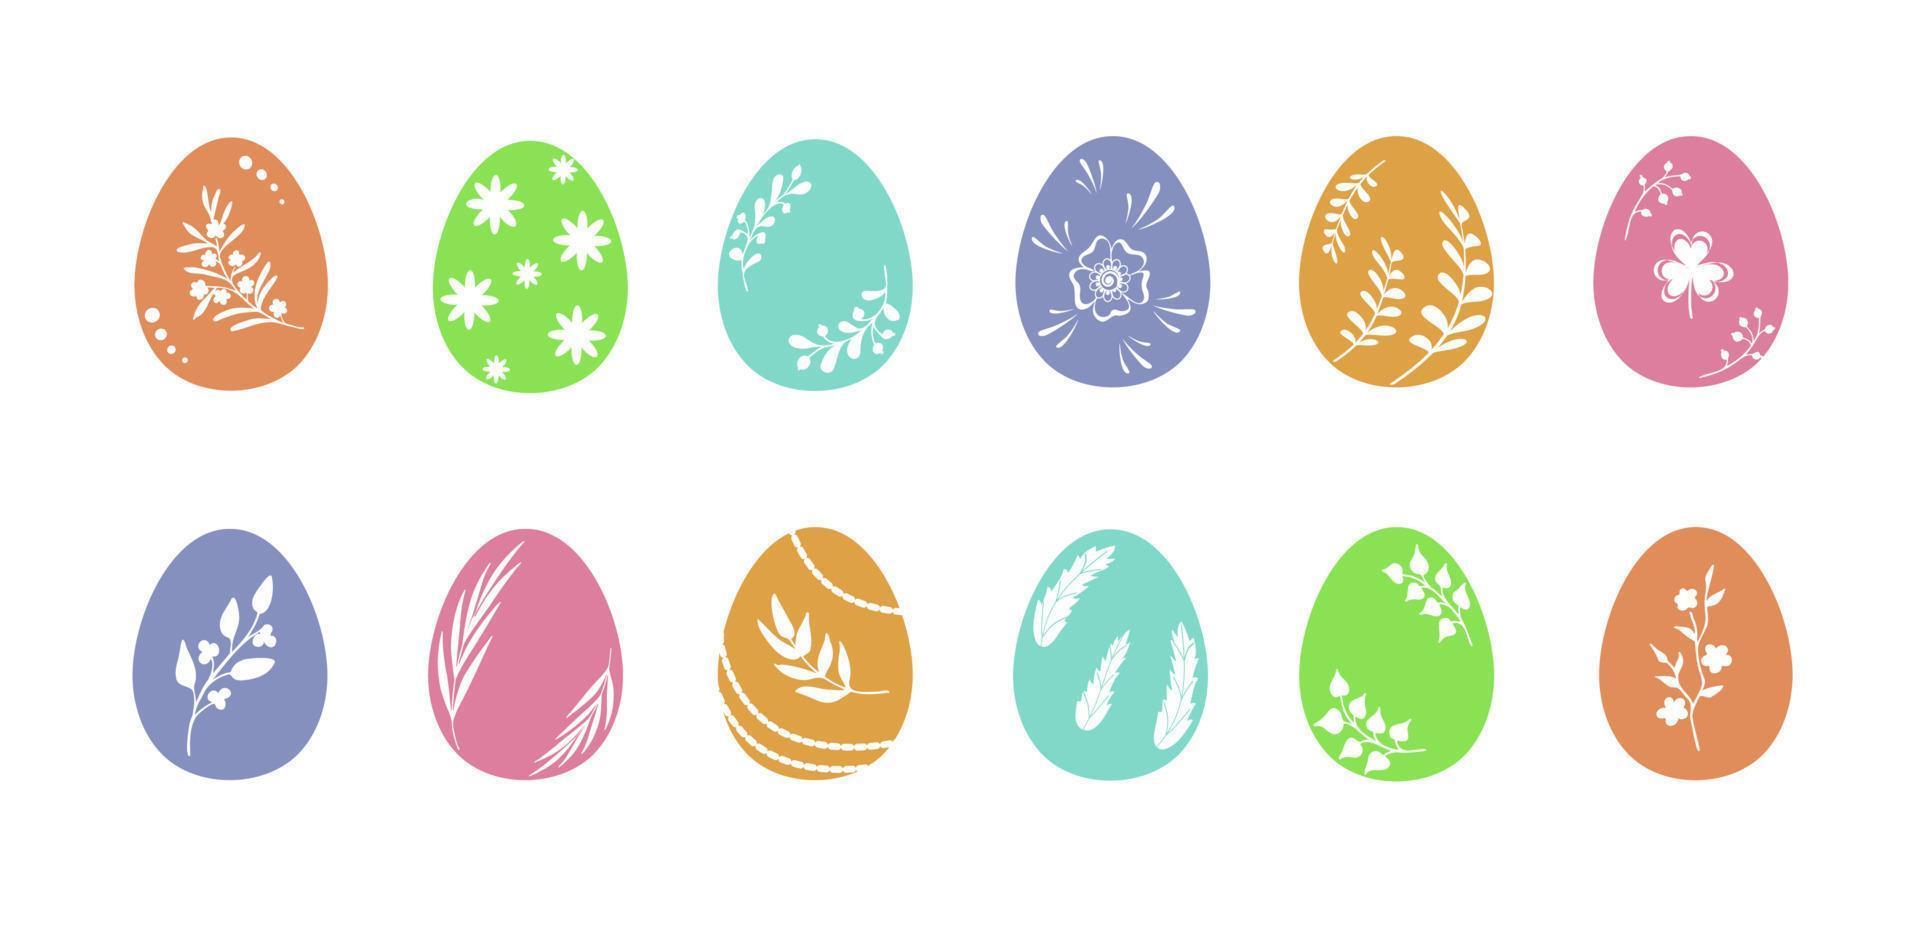 Easter eggs in muted colors with herbal and floral ornaments. Set of modern symbols, artistic flat vector objects